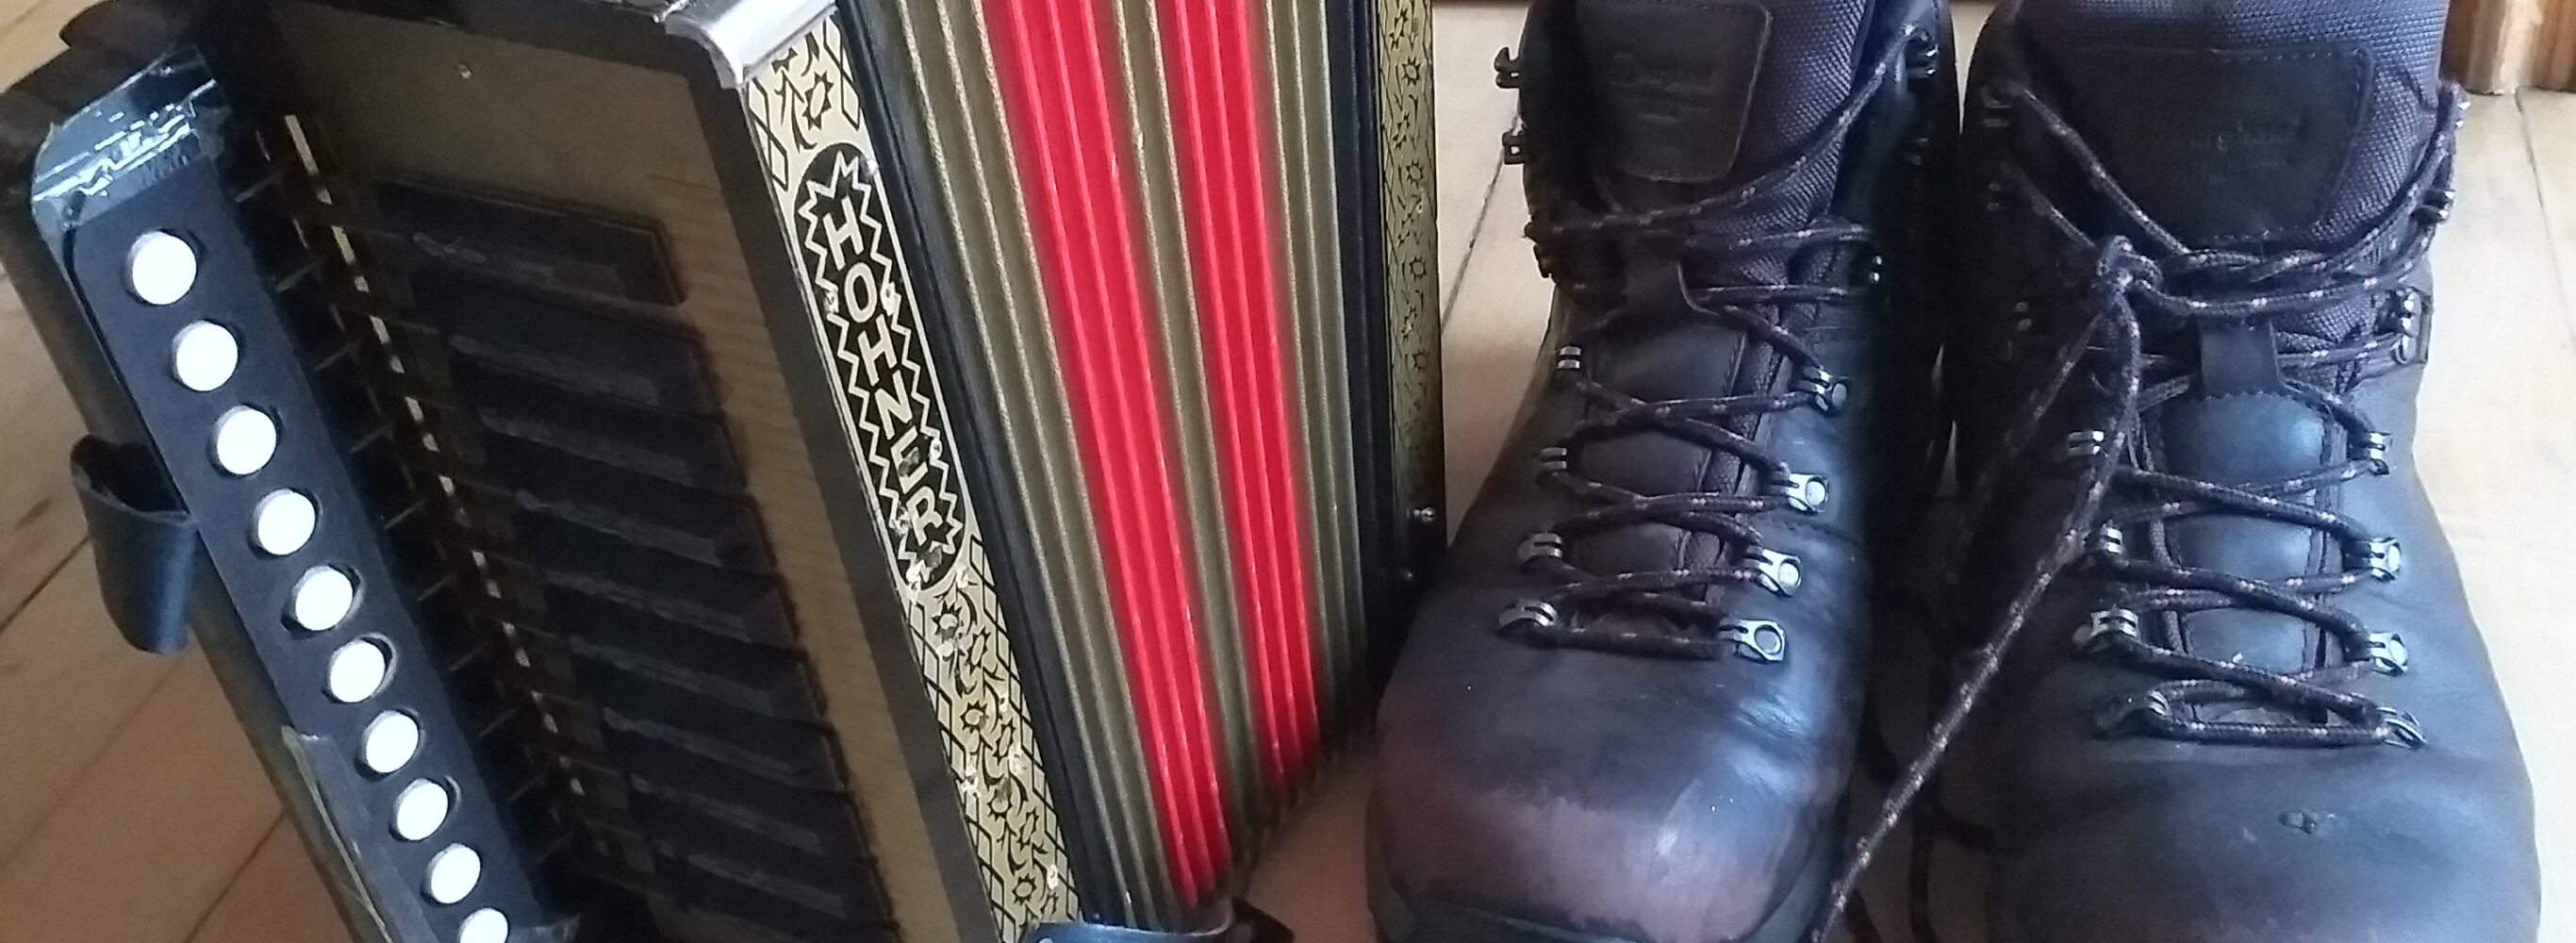 Accordion and a pair of walking boots